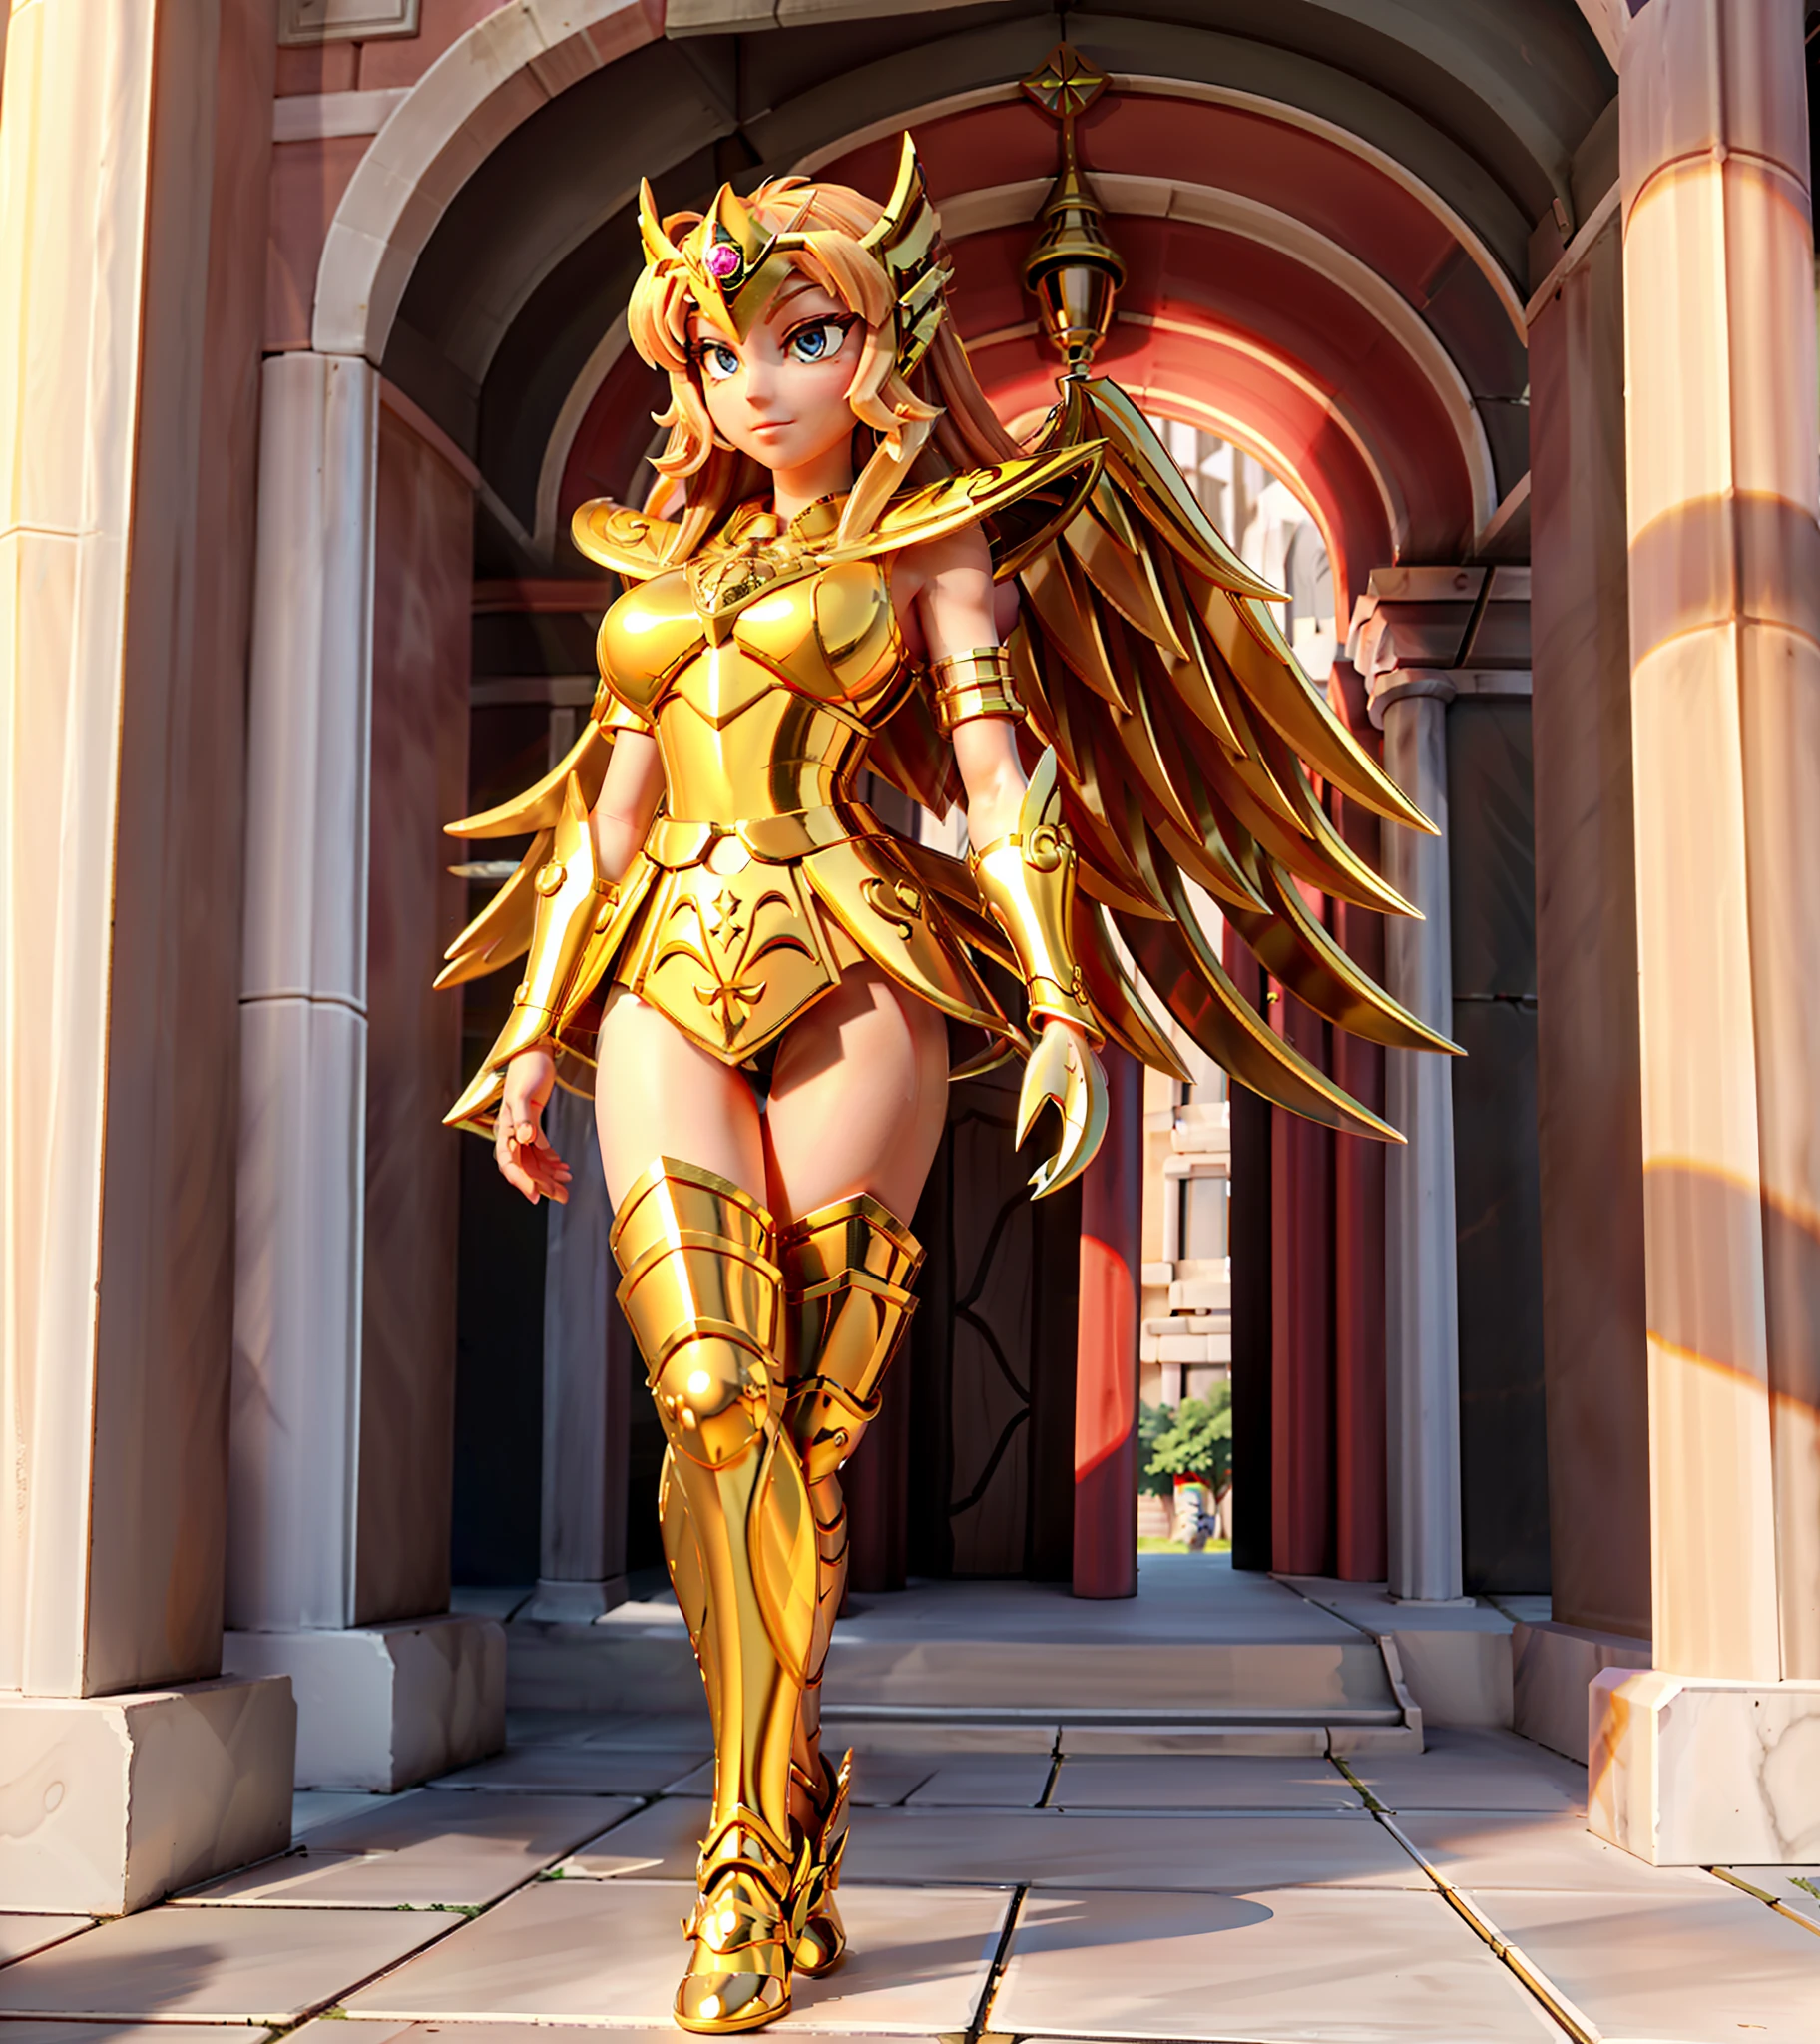 tmasterpiece，Need，tmasterpiece，A detailed face，A detailed eye，full bodyesbian，1girll，SagittariusArmor，female armor，long golden wings，The wings are long tucked away，Walk on the battlefields of ancient Greece，NSFW，Raised sexy，（8K，RAW photos，best qualtiy，tmasterpiece：1.2 ), solofocus, mgq_Valkyrie, Wings, sky,super wide shot， sface focus，sexy armor，No underwear，Naked，Bling armone fine skin，Plump breasts，Saint Seiya Armor， Detailed armor pattern，messy  hair，highly detailed realistic photograph of, (cellshading)，god light，super sharp focus，Ultra high quality,，with dynamism，(extremely giant breasts:1.6)，(Bare breasts:1.4)， Long hair, (Shiny skin:1.4)， shiny lip, Very big ass， Symmetrical detail surfaces，shades，Sexy，Masterpiece，Ultra-high saturation，hight contrast，High-gloss armor，Smooth skin，